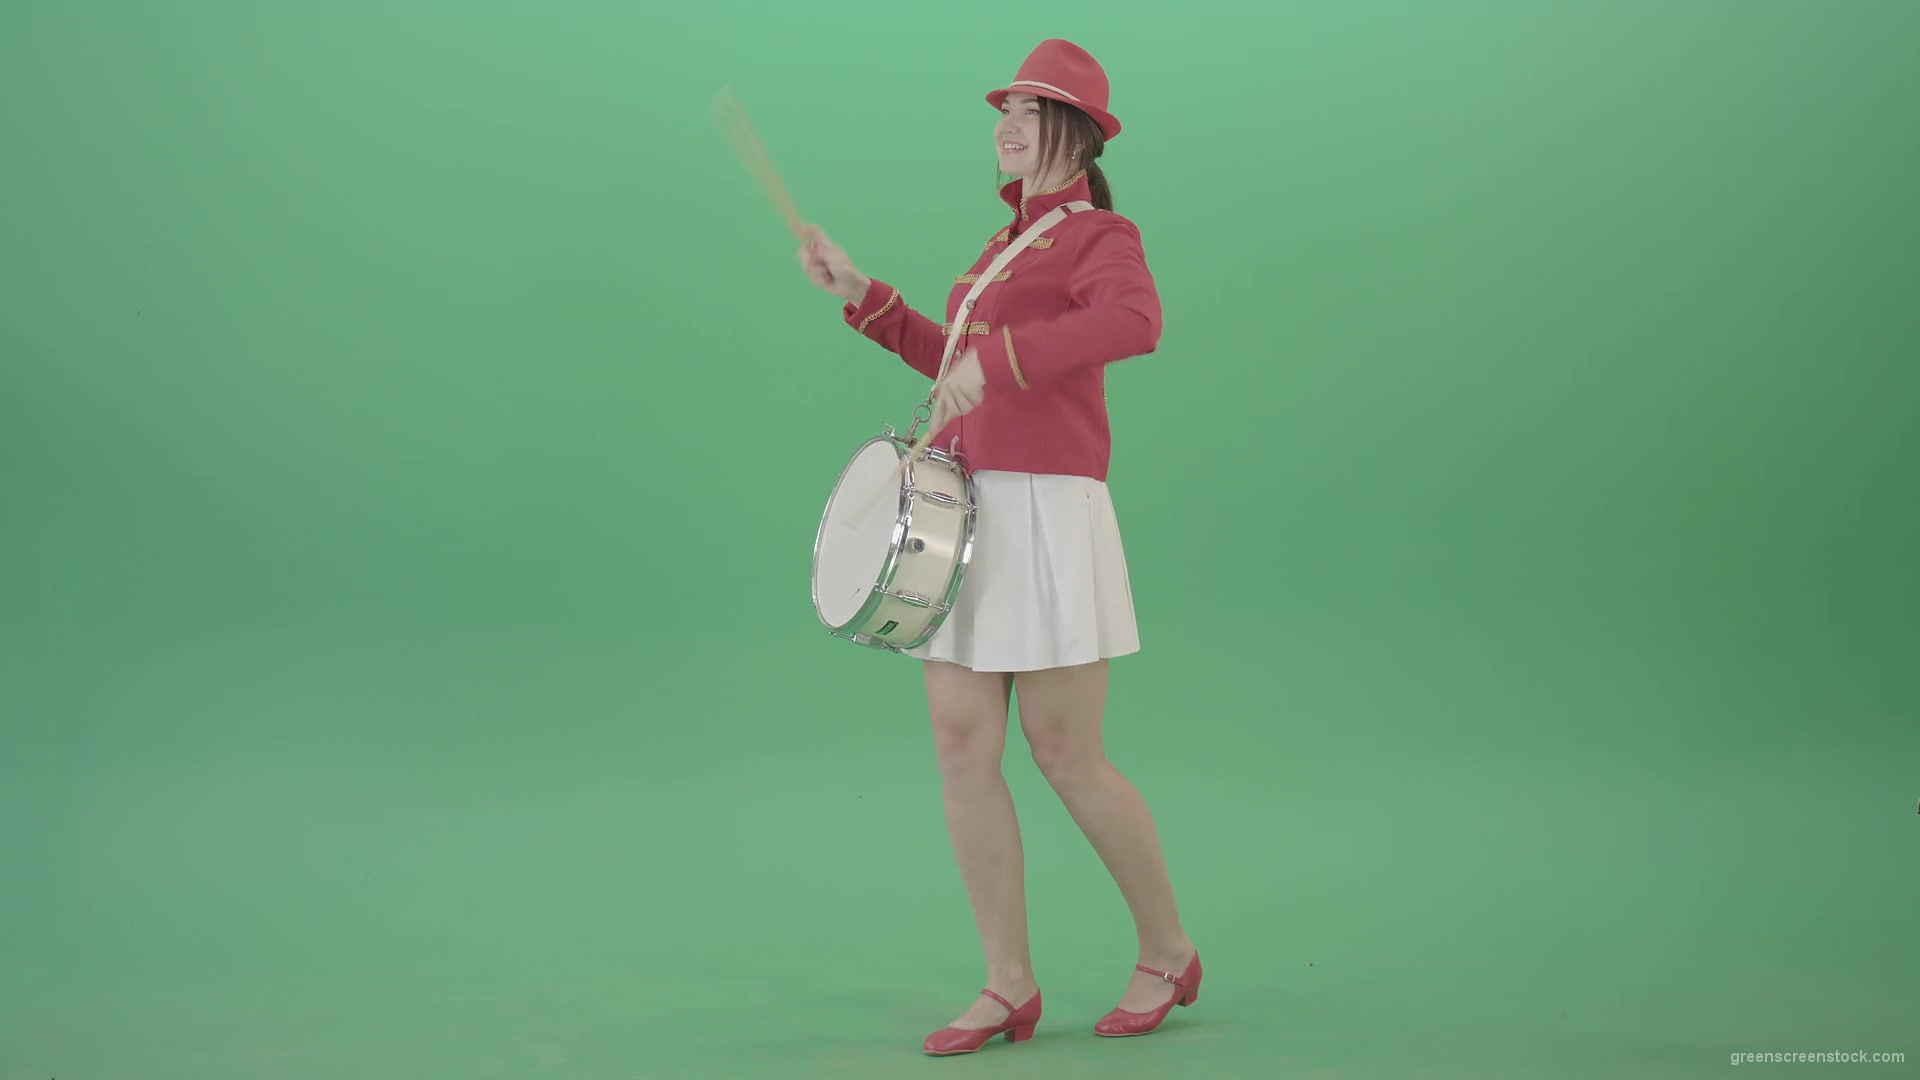 Funny-Girl-in-red-white-uniform-makes-percussion-and-play-drums-isolated-on-green-screen-4K-Video-Footage-1920_006 Green Screen Stock